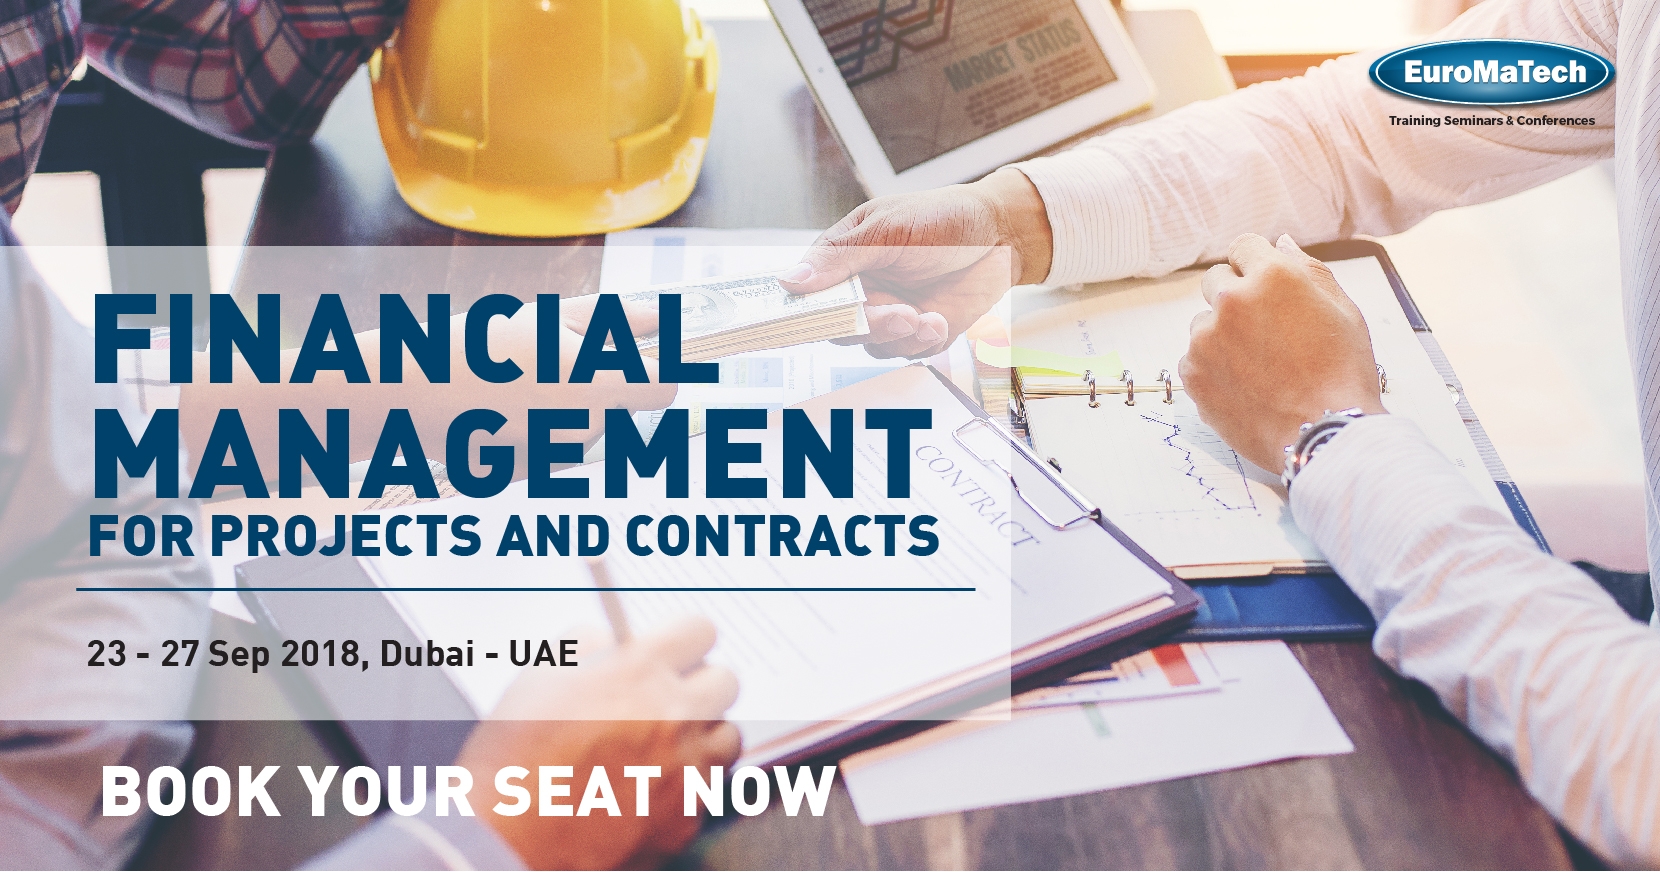 Financial Management for Projects and Contracts Training Course